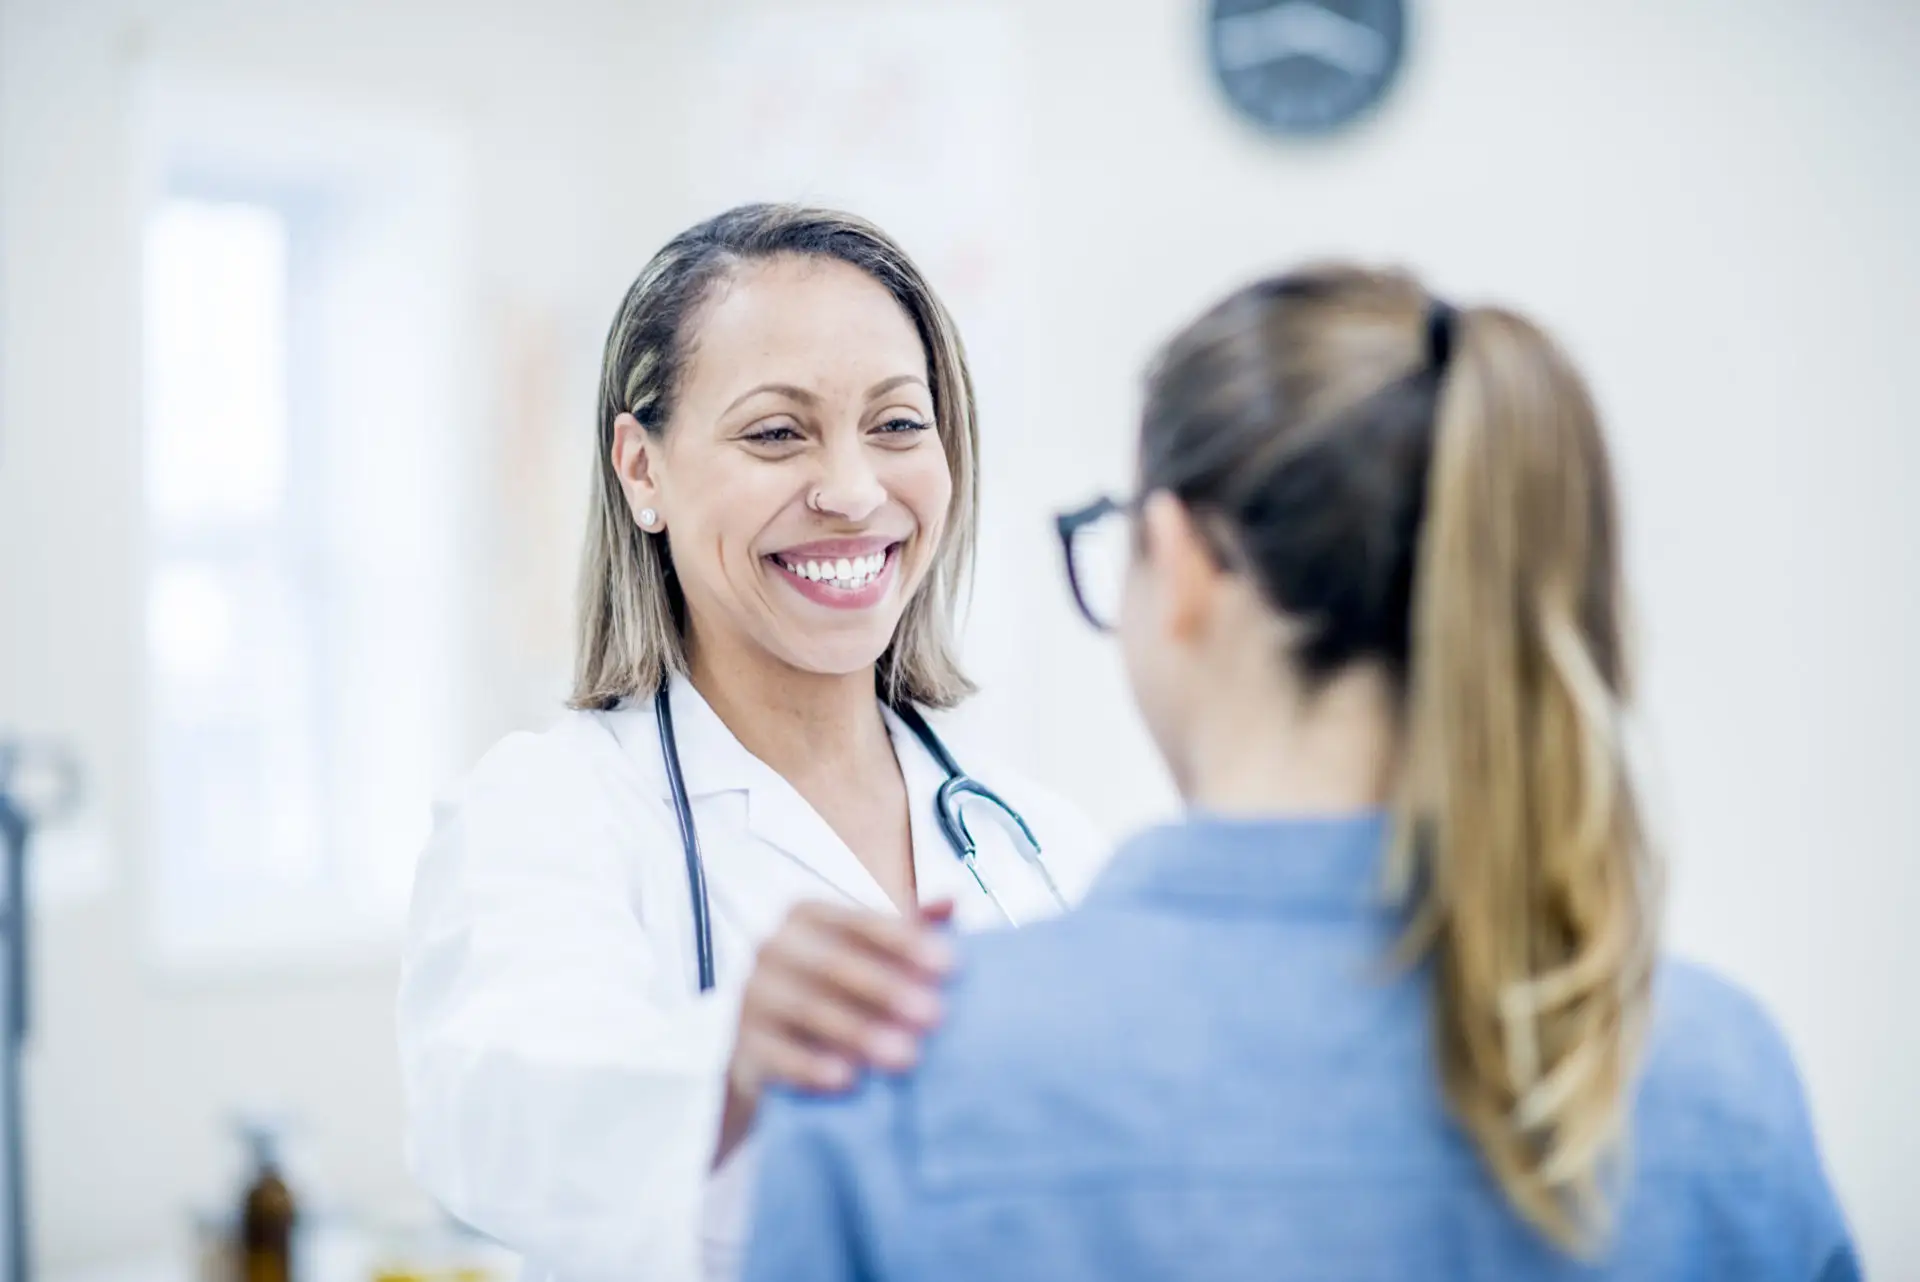 A healthcare professional smiling with her hand on a patient's shoulder